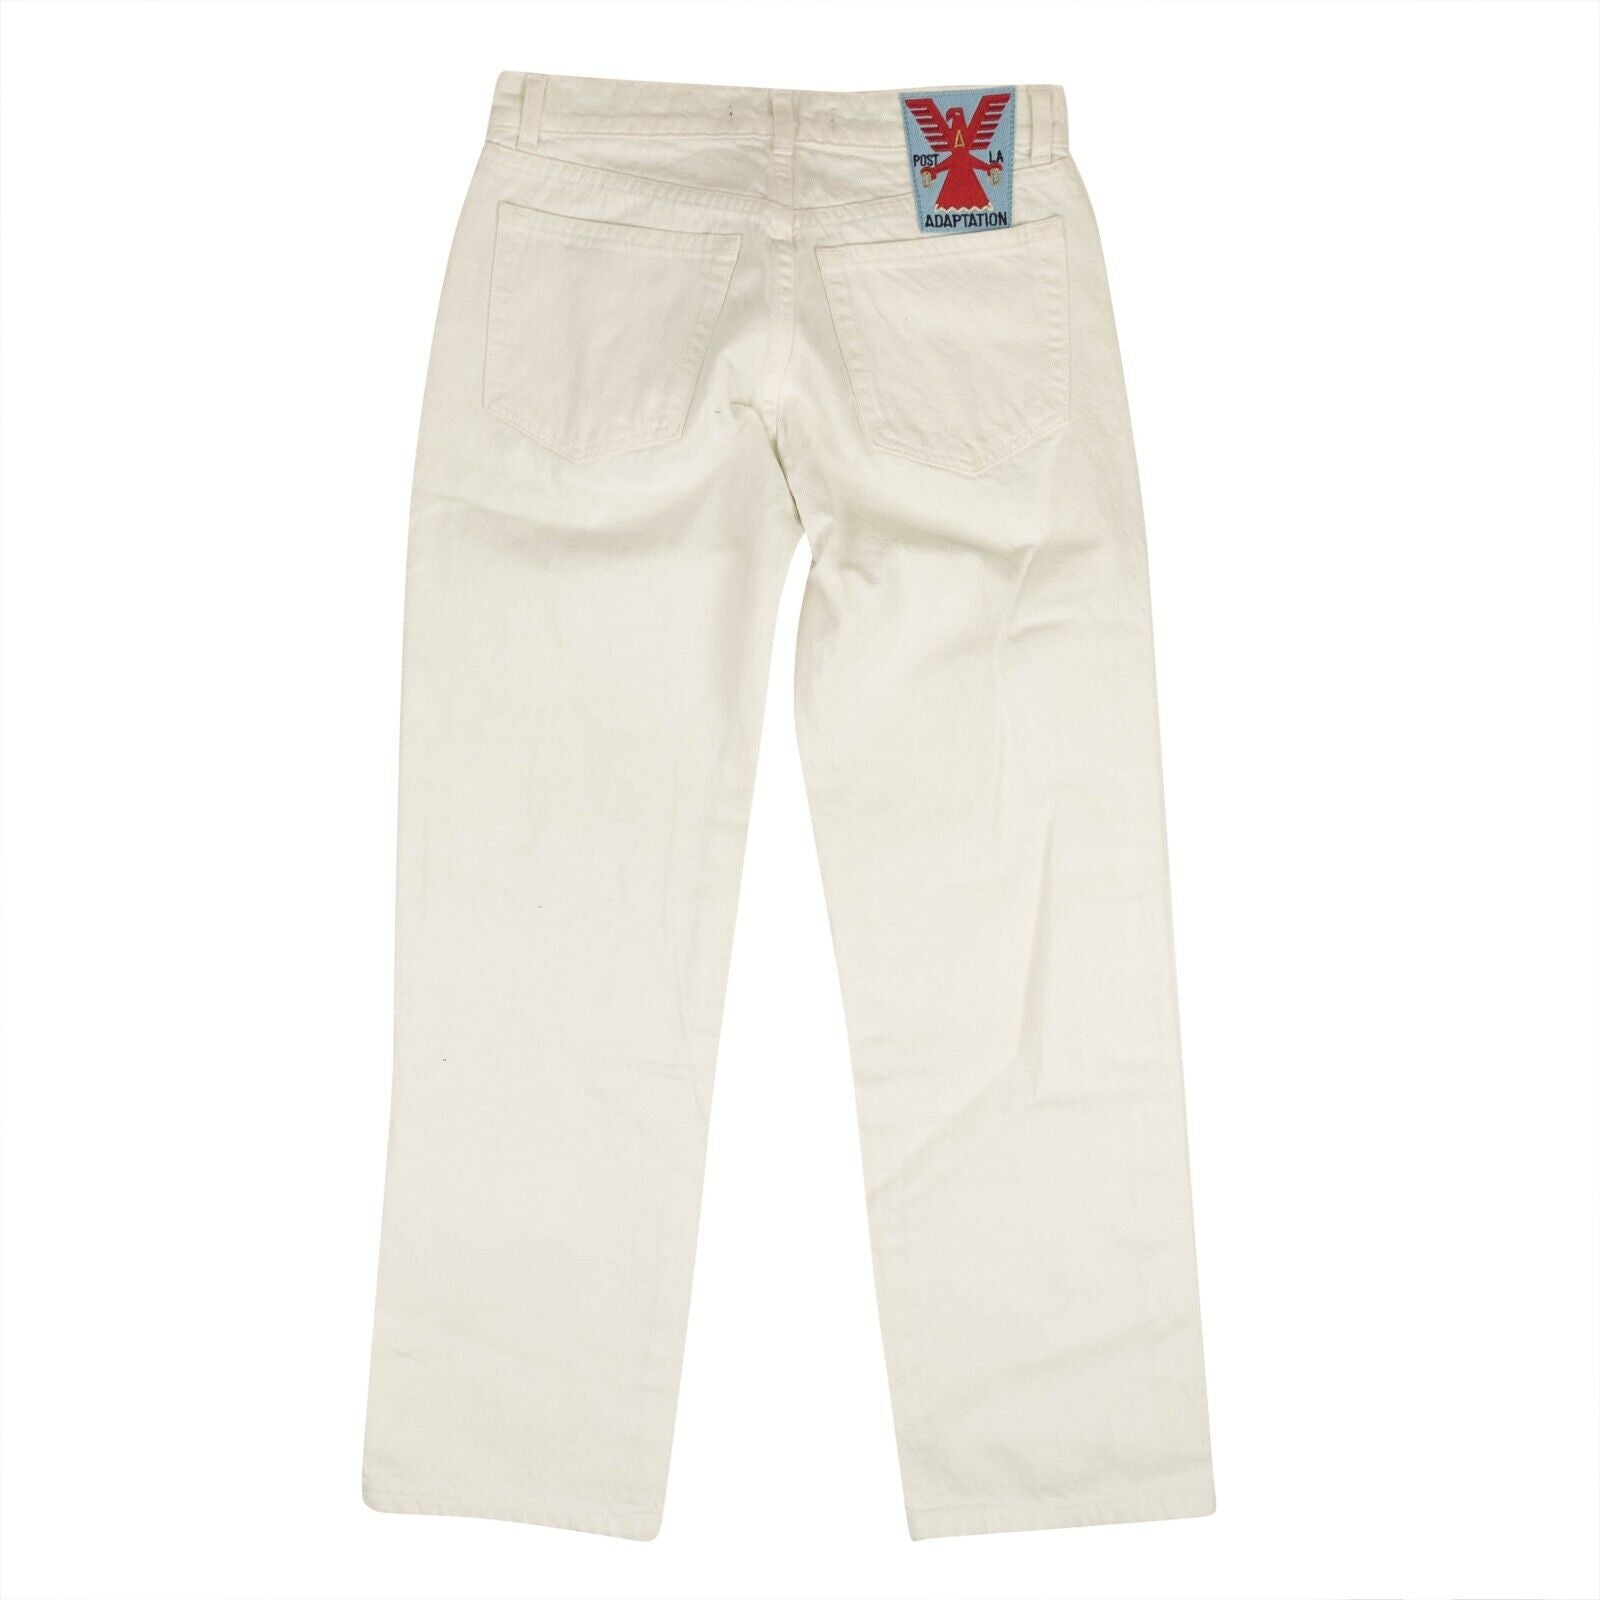 Adaptation Slouch Jeans - White